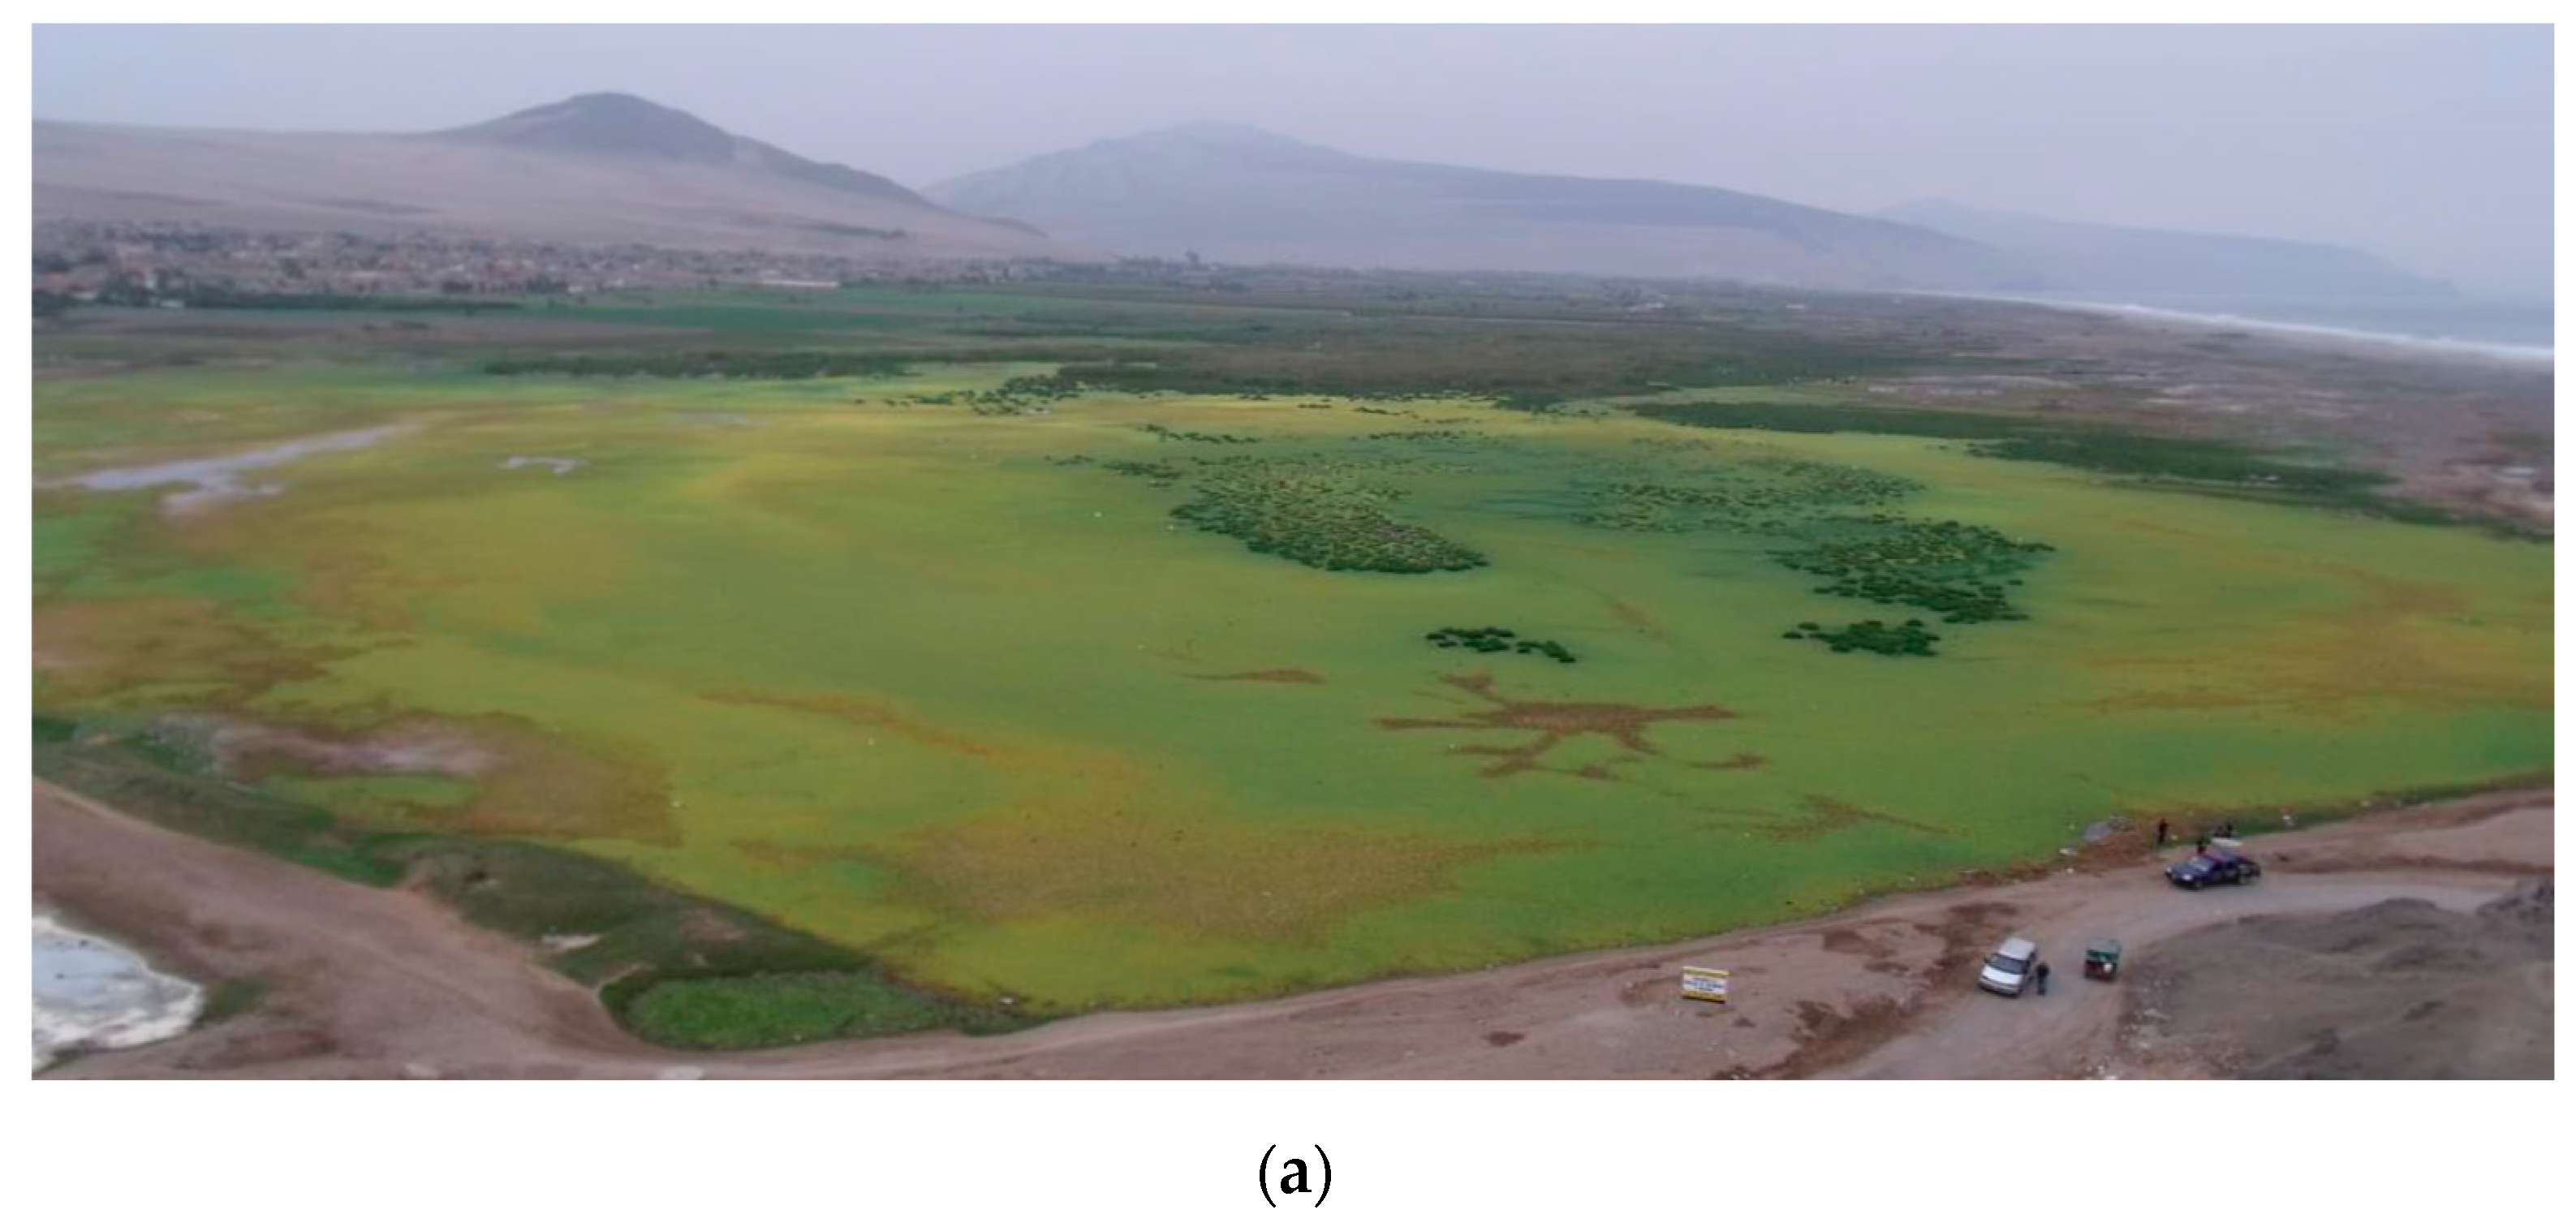 Water | Free Full-Text | Innovative Feasibility Study for the Reclamation  of the Cascajo Wetlands in Peru Utilizing Sustainable Technologies